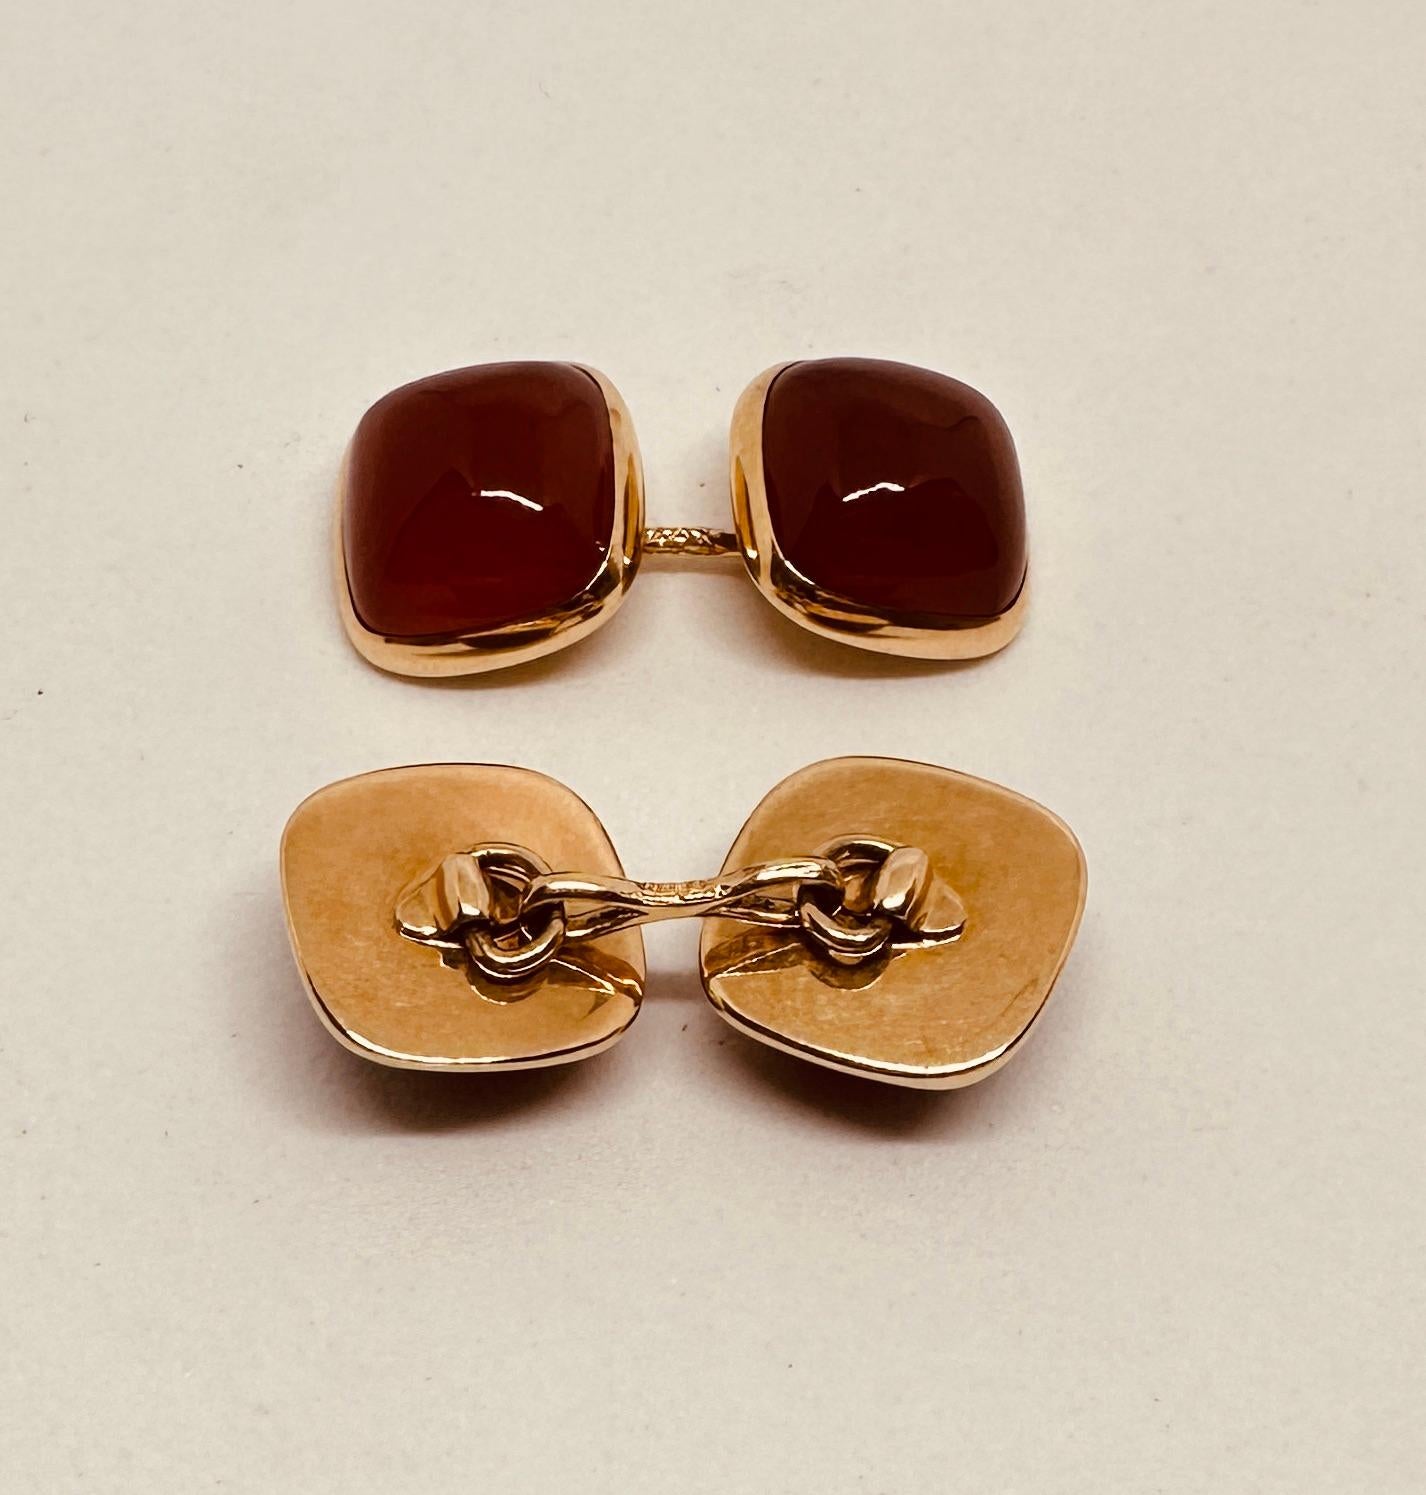 Sugarloaf Cabochon Art Deco Double-Sided Cufflinks with Carnelians in Yellow Gold by Larter & Sons